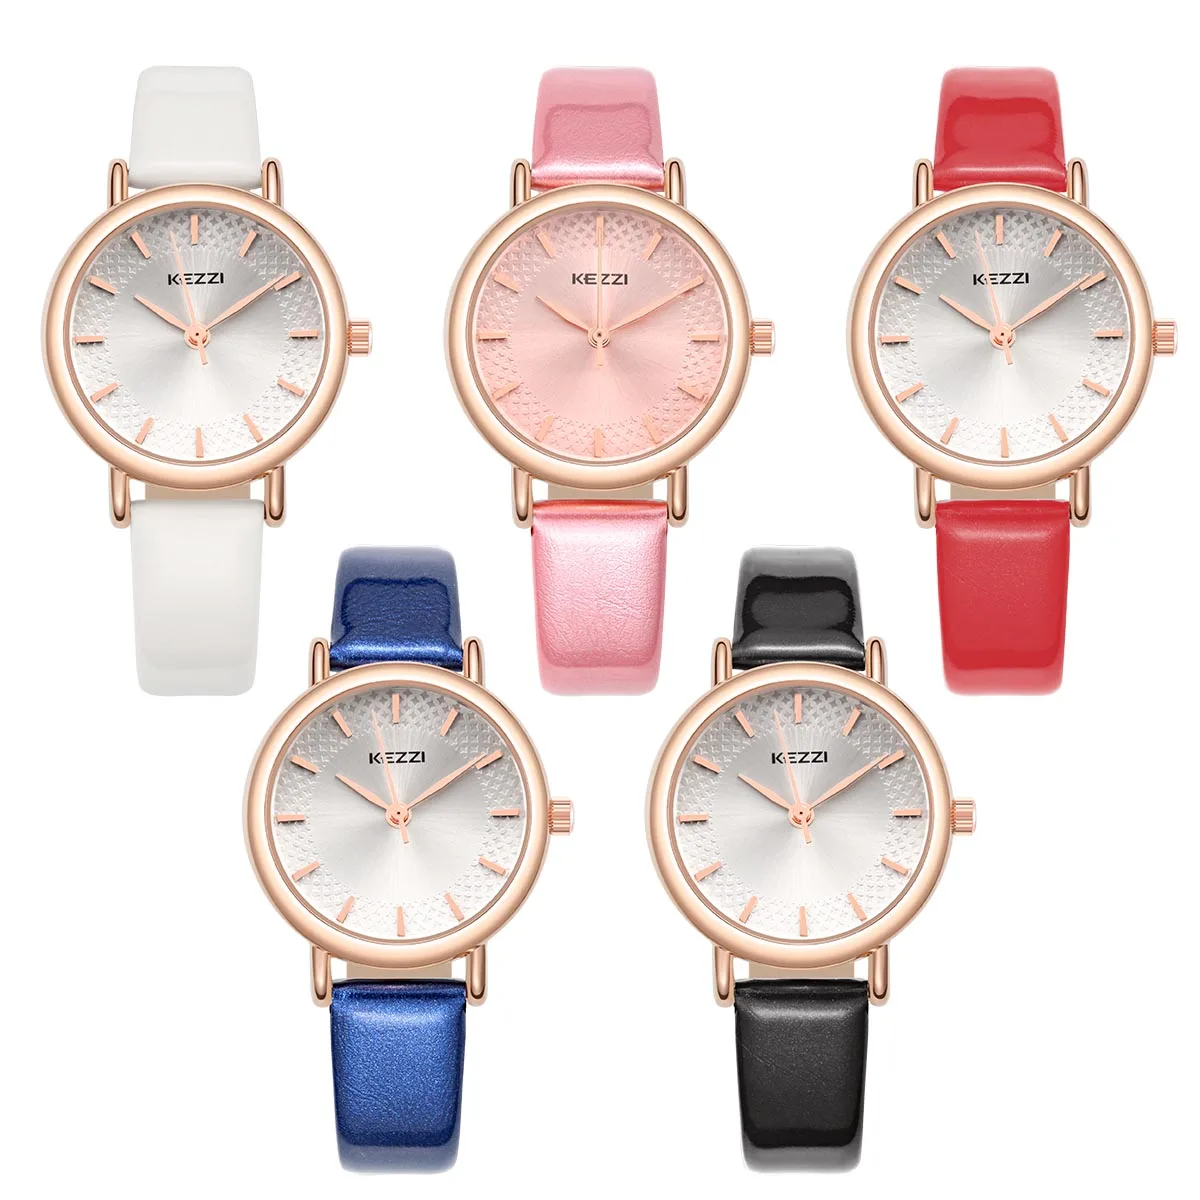 NO.2- A148 Women's Leather Watches Classic Design Rectangular Femal Waterproof Watches fashion brand wristwatches